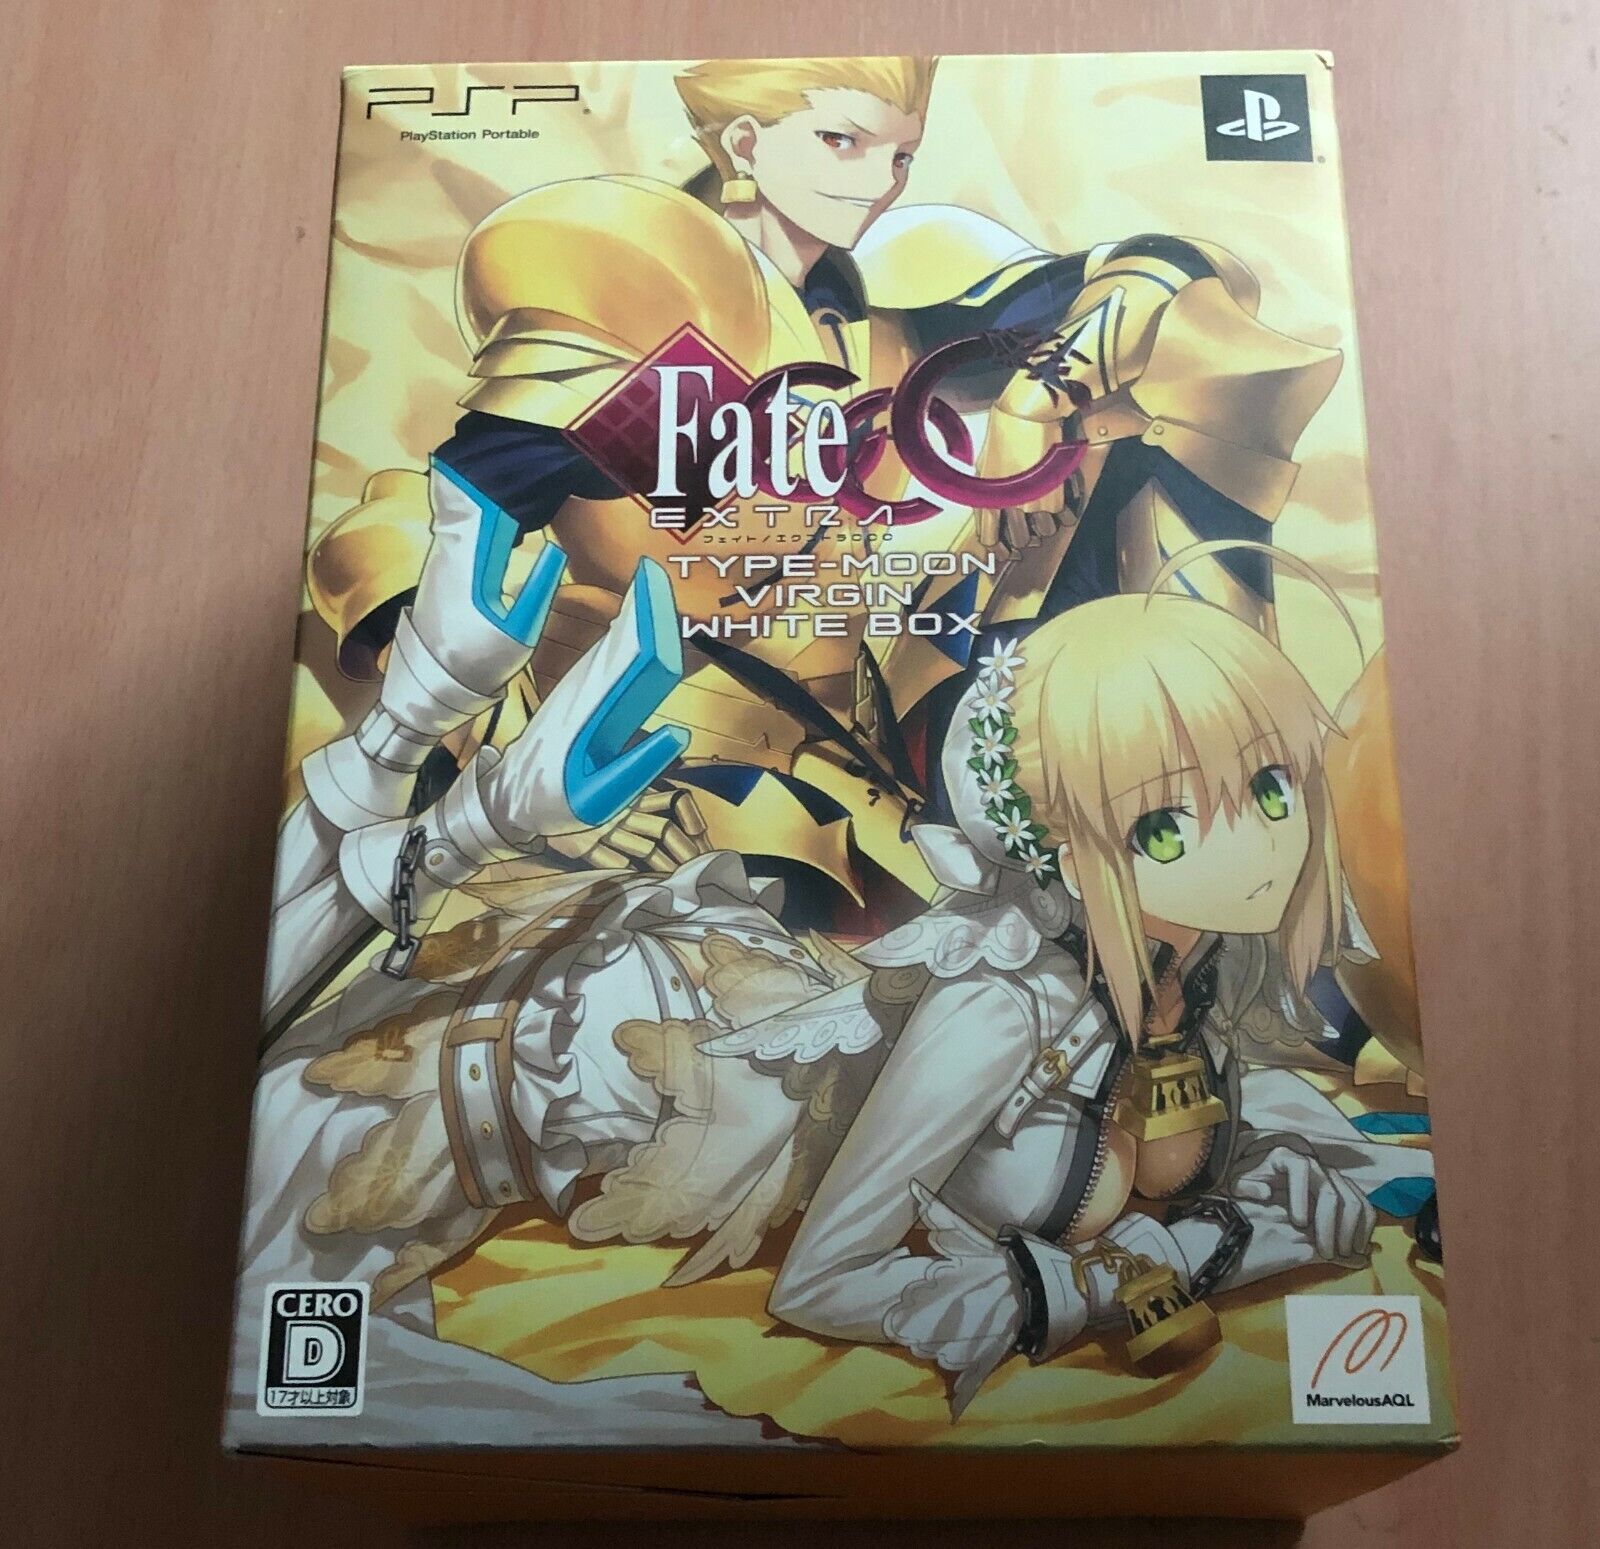 SONY PSP Fate / Extra CCC Type Moon Virgin White Limited Box